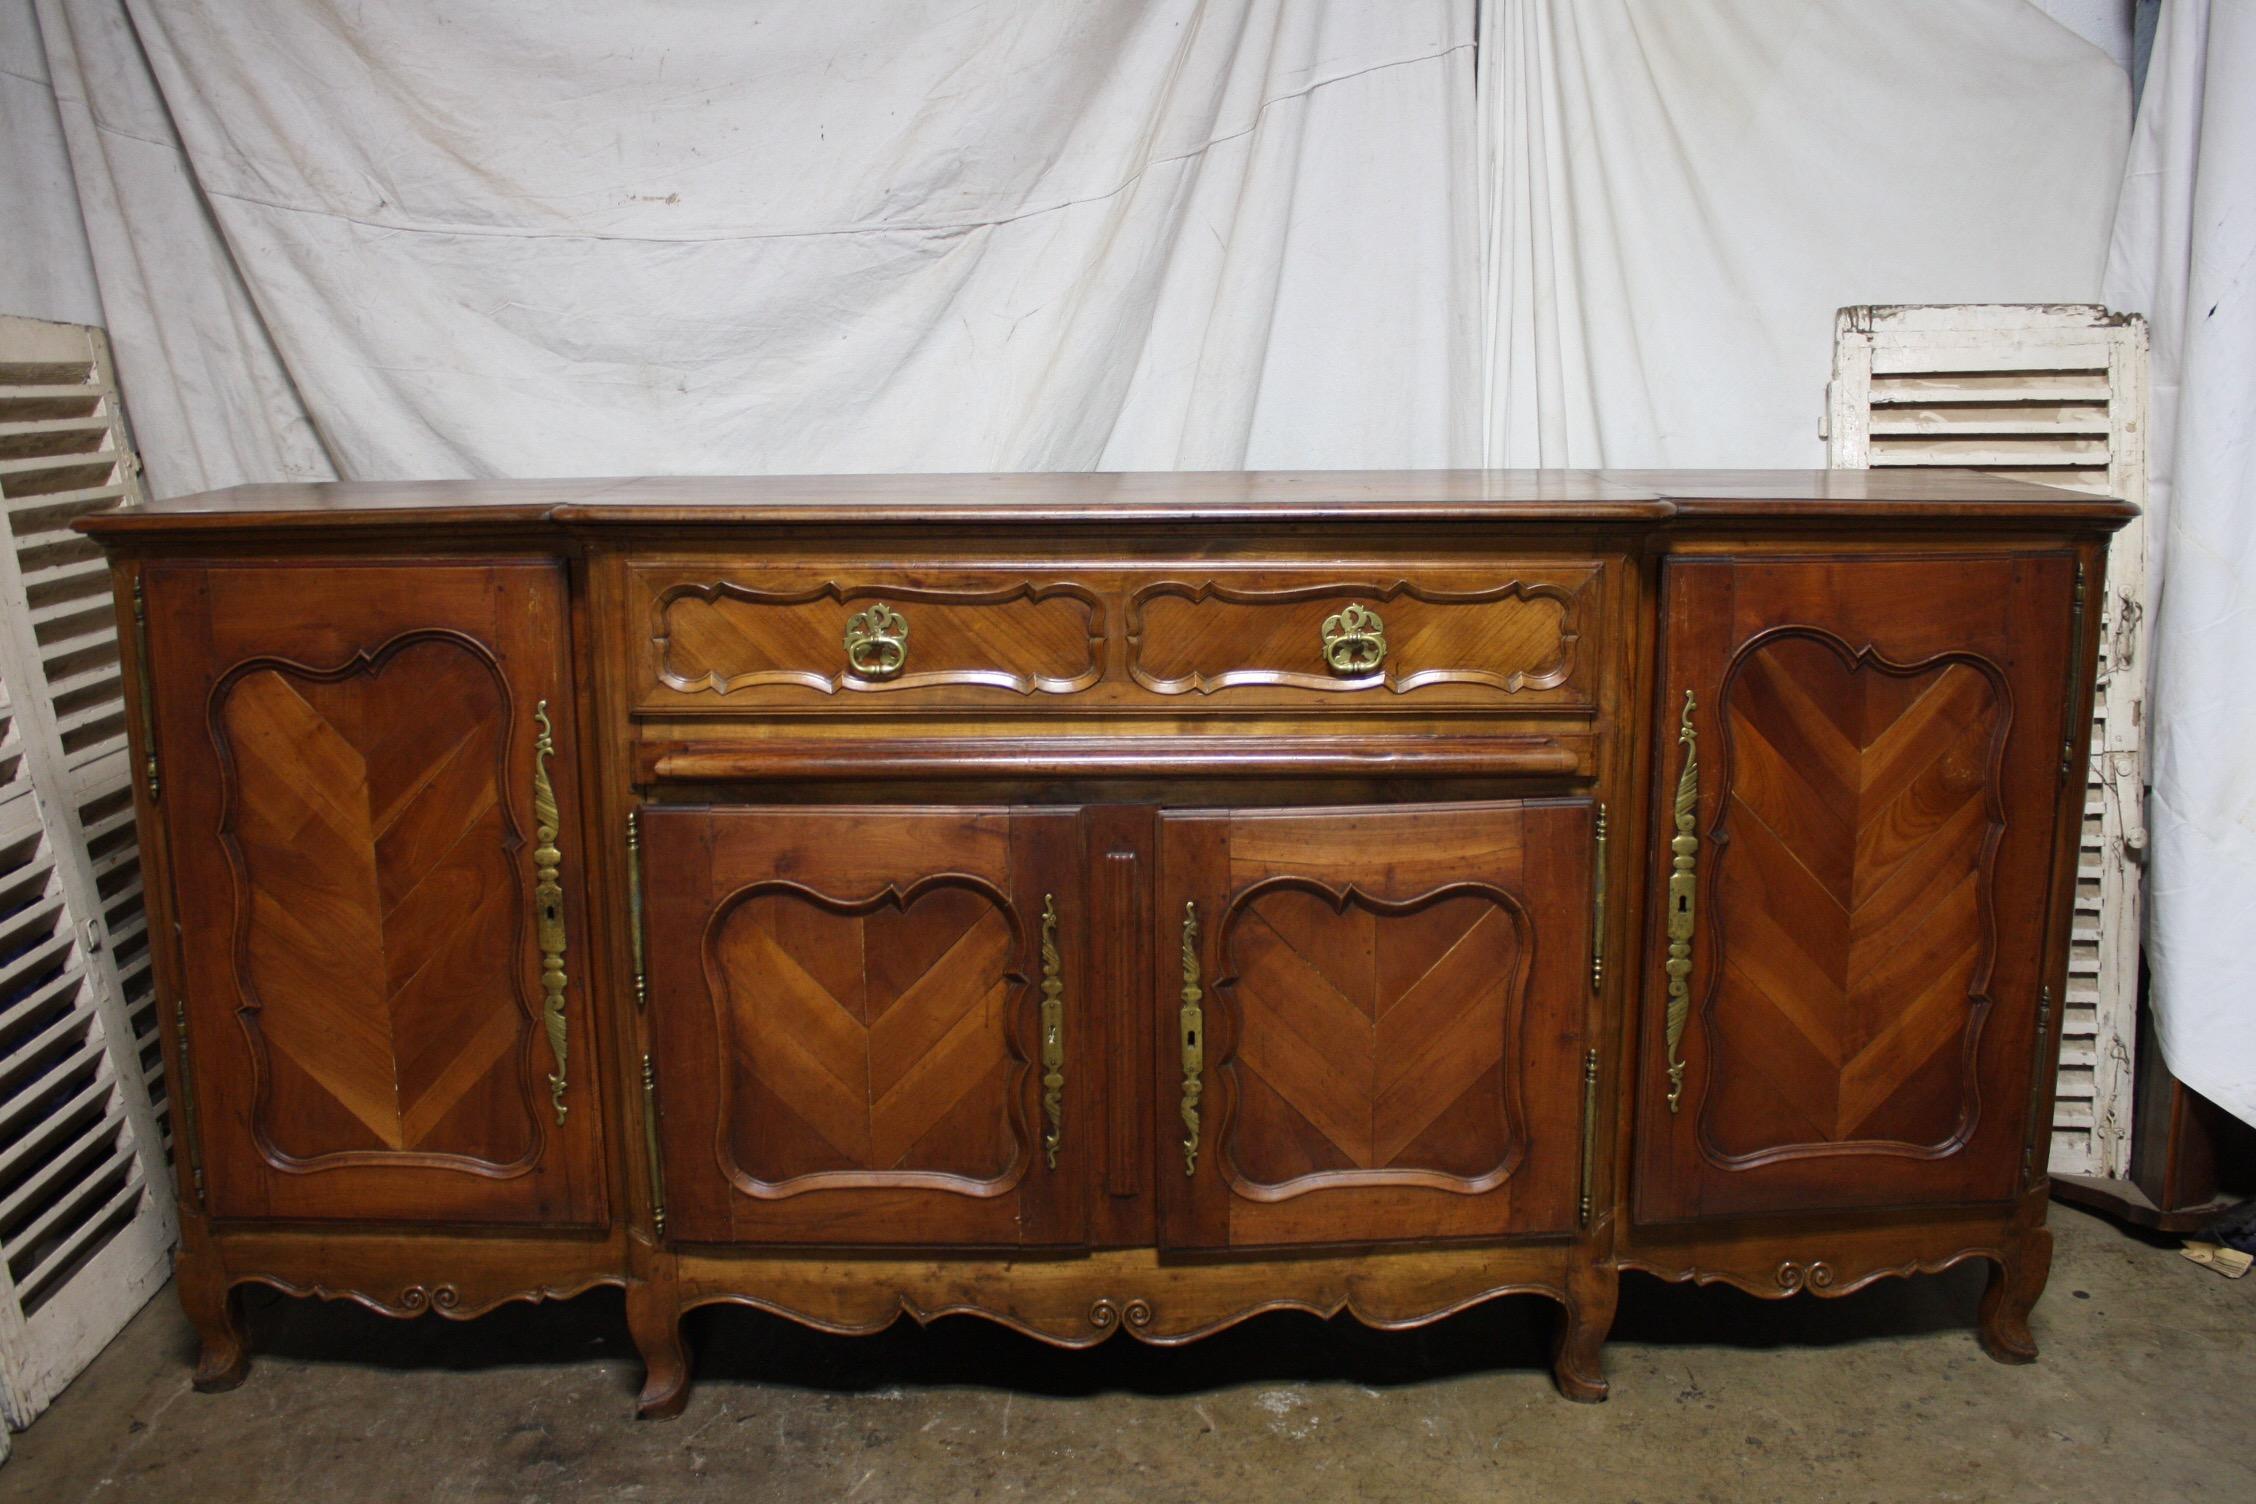 This is a Long and high sideboard, very strong and powerful standing, the parquetry on the doors gives a character, very well built, with a slider under the big drawer. Originally the slider was used to put dishes, bread or cheese.
Beautiful piece.